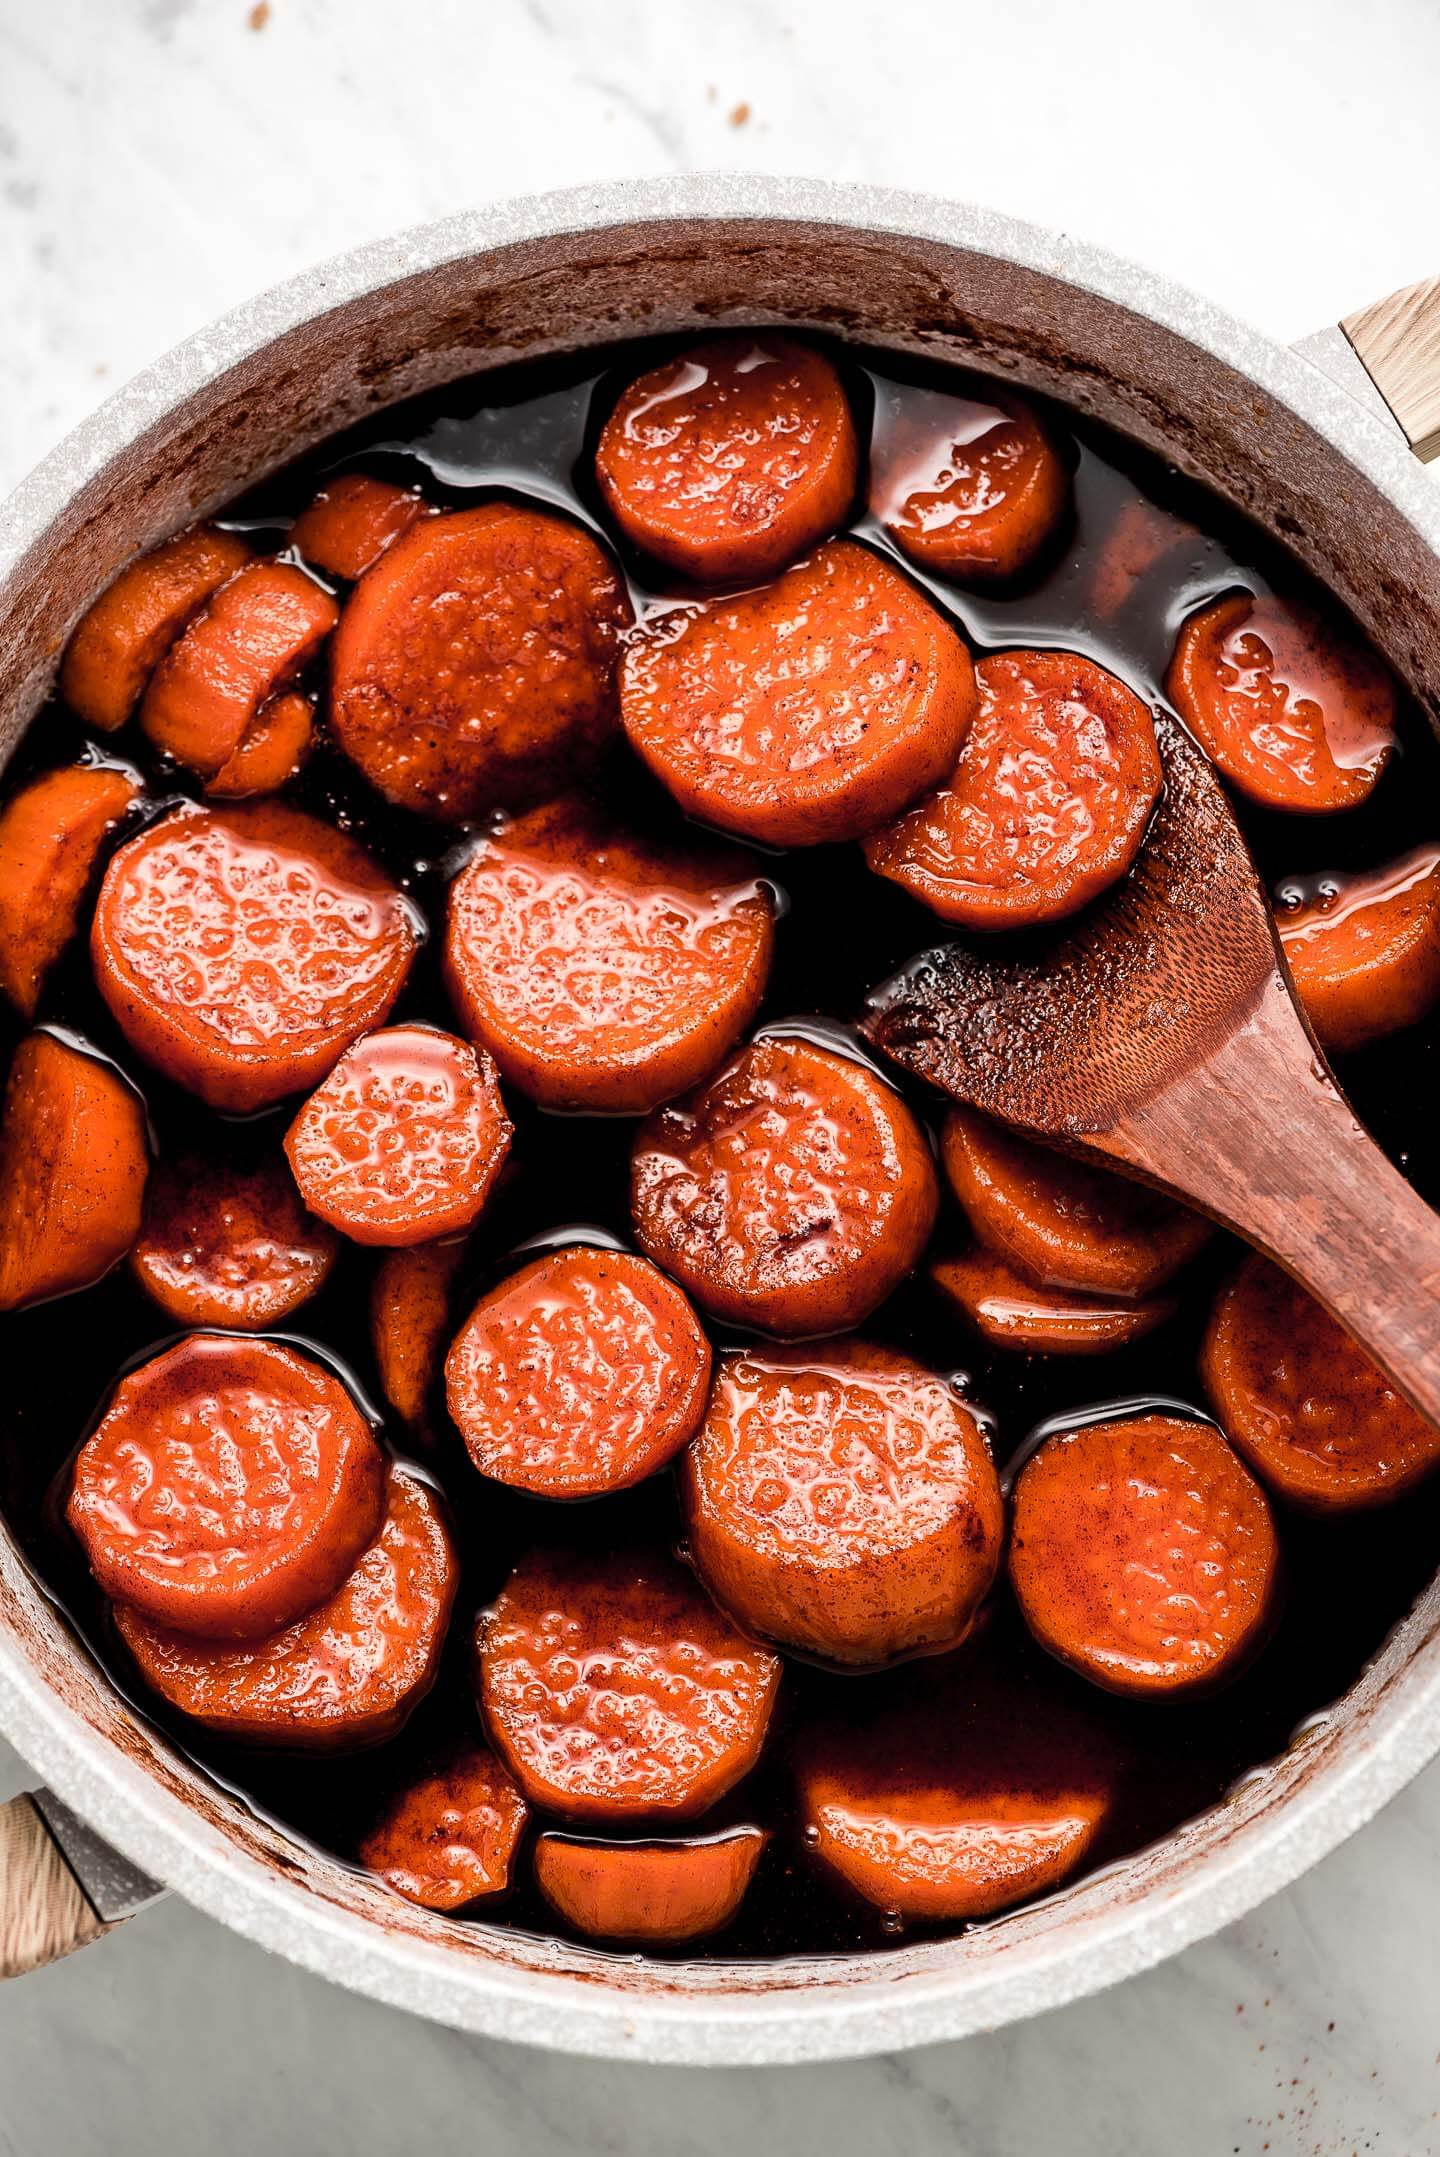 Candied Yams in a large pan with a wooden spoon lifting some out.